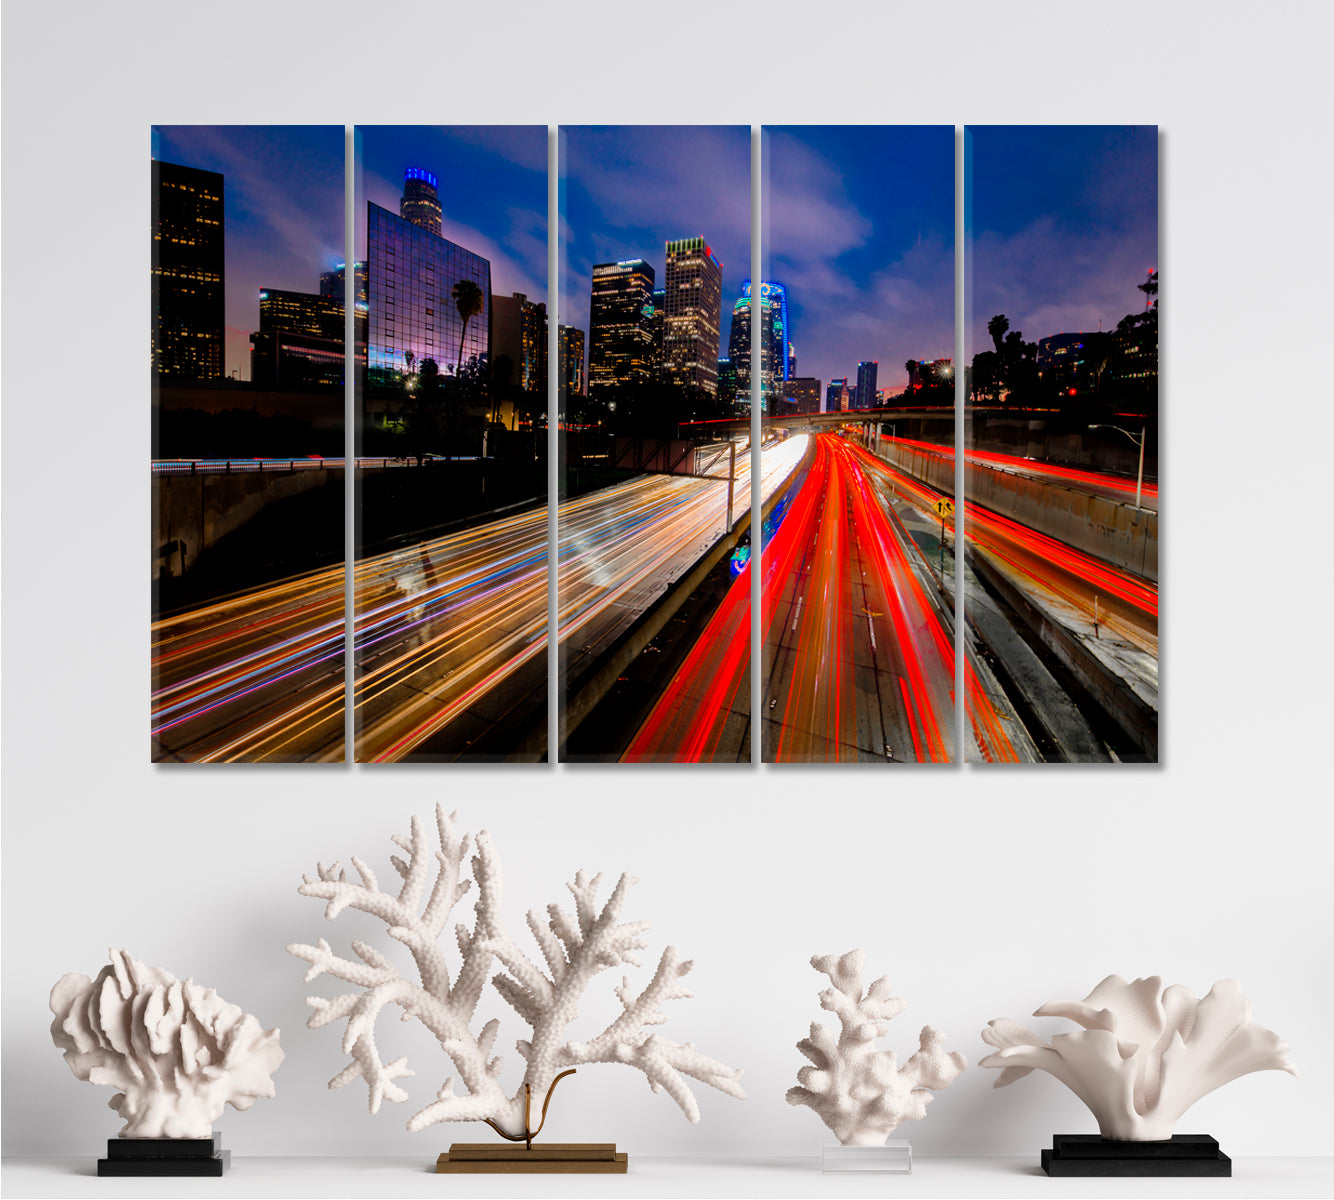 ROADS TRAILS Streaked Car Lights Road To Downtown Los Angeles Cities Wall Art Artesty 5 panels 36" x 24" 